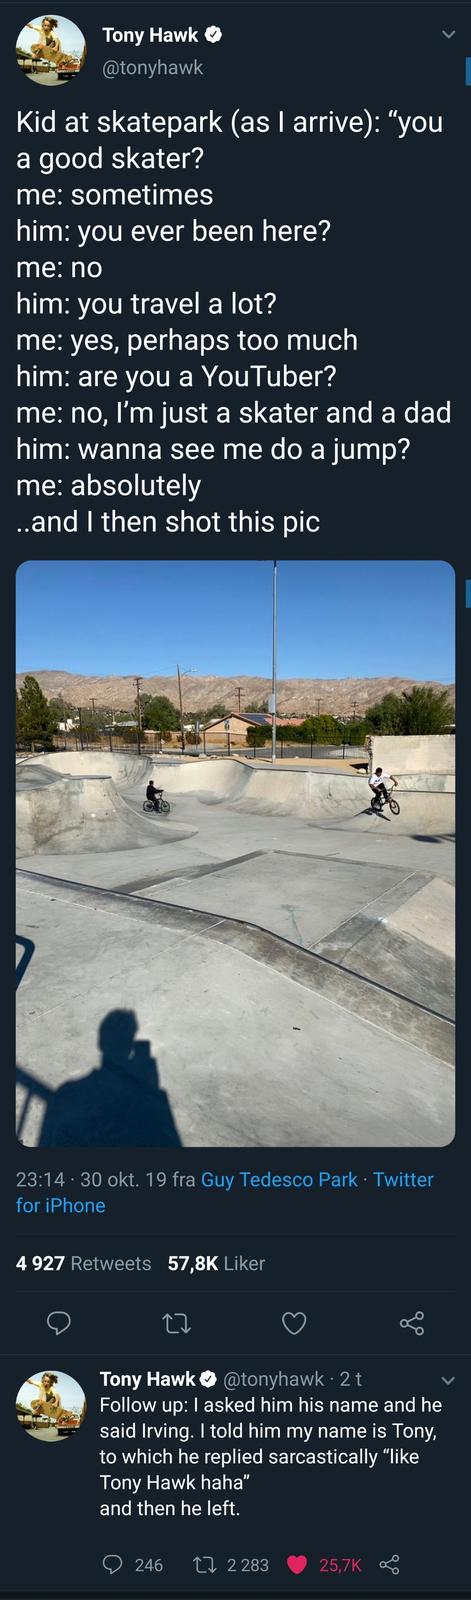 tony hawk kid at skatepark - Tony Hawk Kid at skatepark as I arrive "you a good skater? me sometimes him you ever been here? me no him you travel a lot? me yes, perhaps too much him are you a YouTuber? me no, I'm just a skater and a dad him wanna see me d